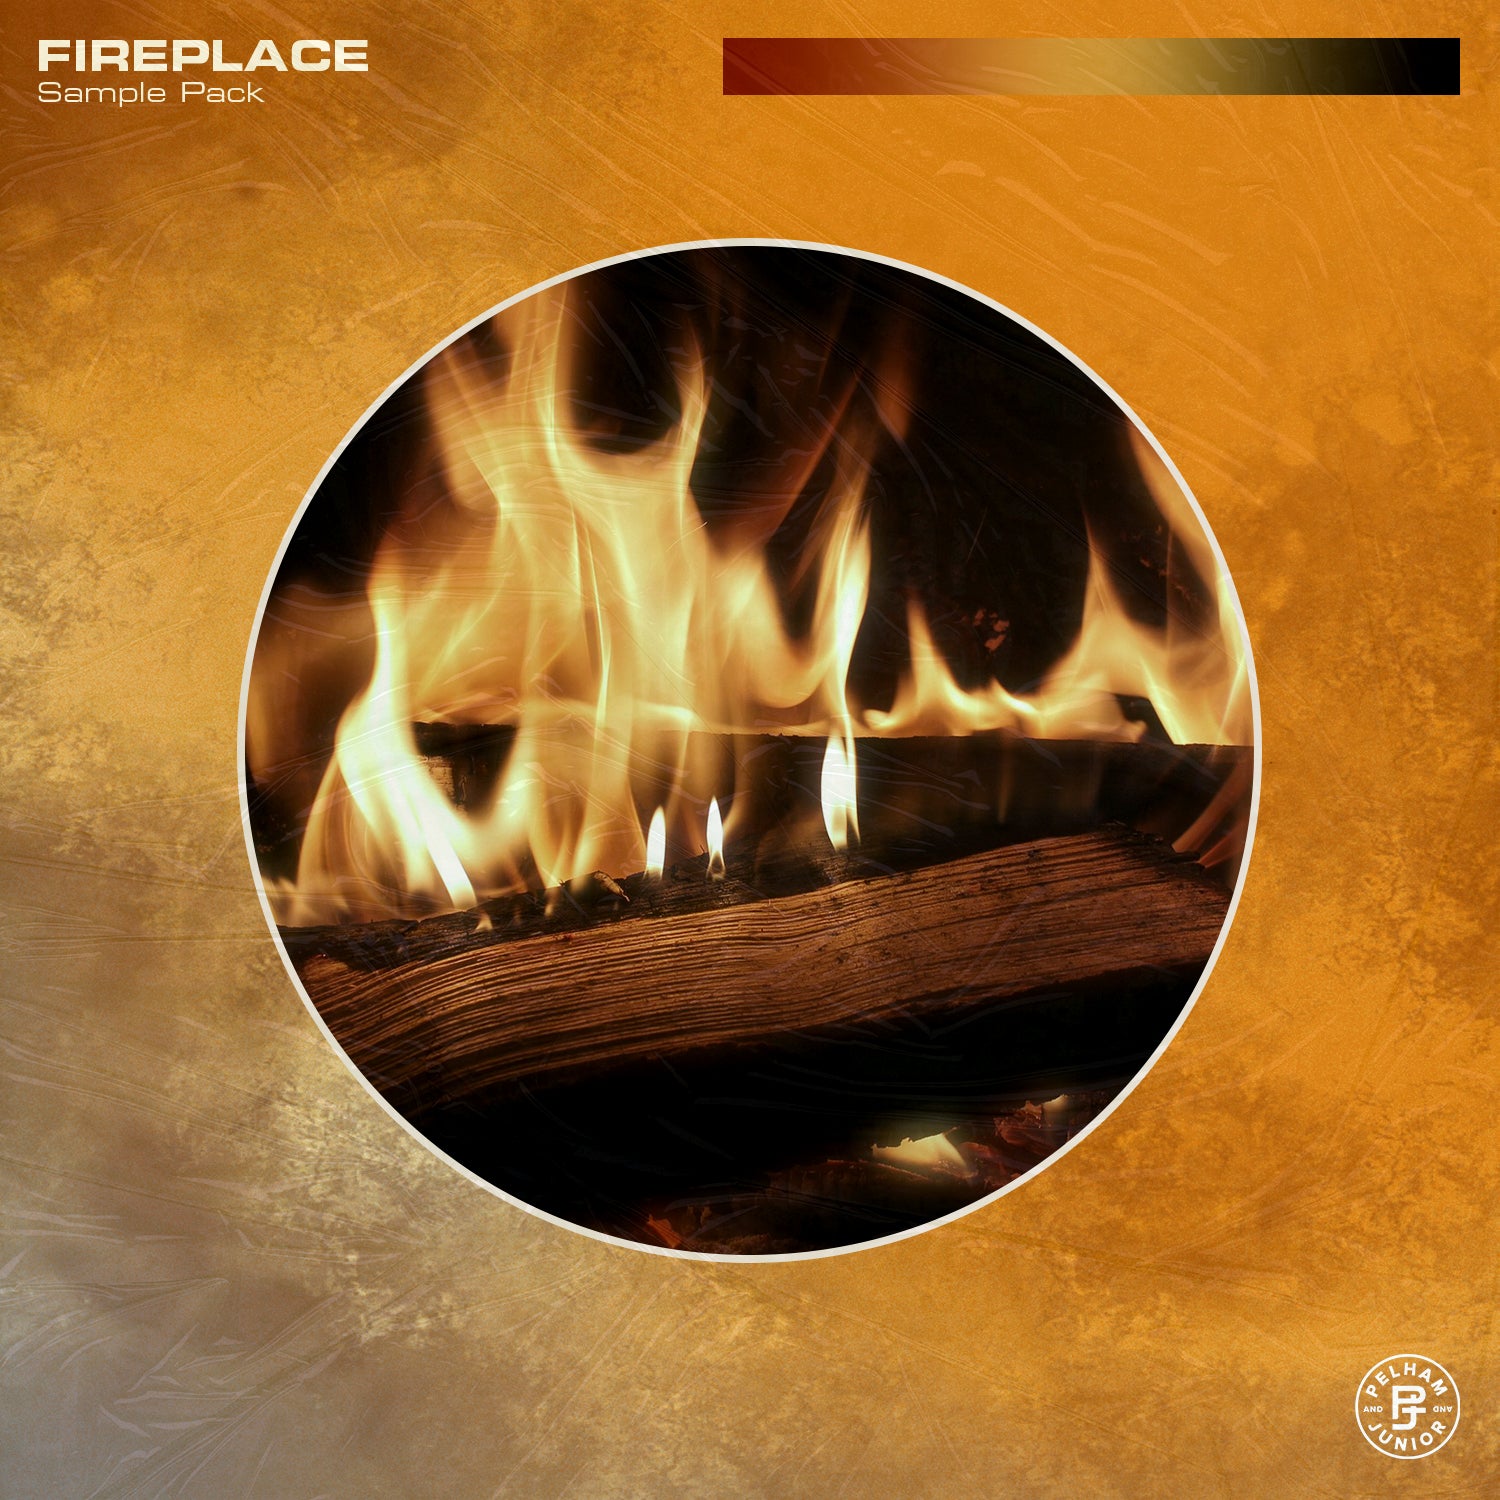 Fireplace (Sample Pack)